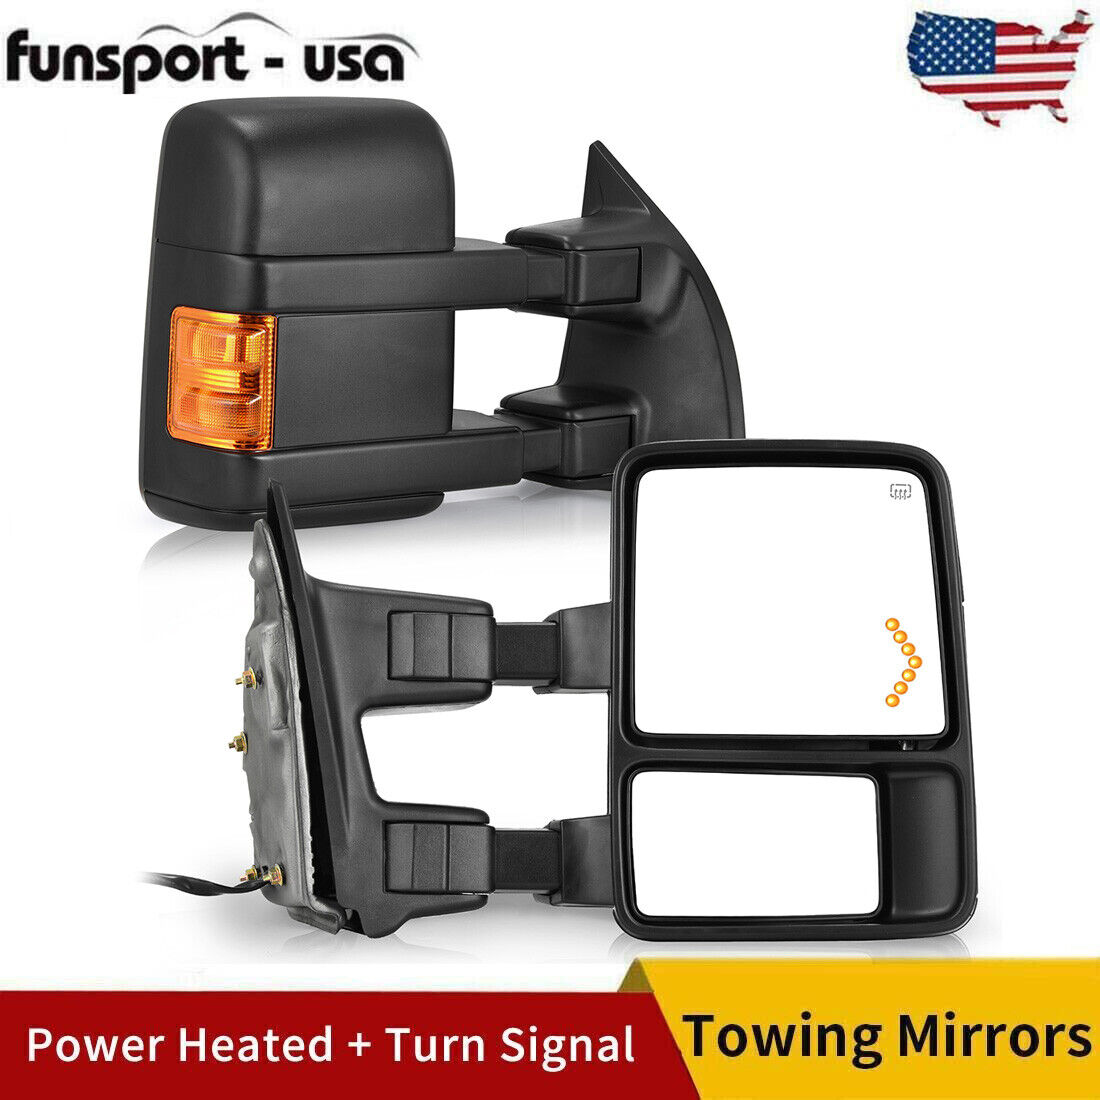 Tow Mirrors for 08-16 Ford F250 F350 F450 Super Duty Power Heated Turn Signal